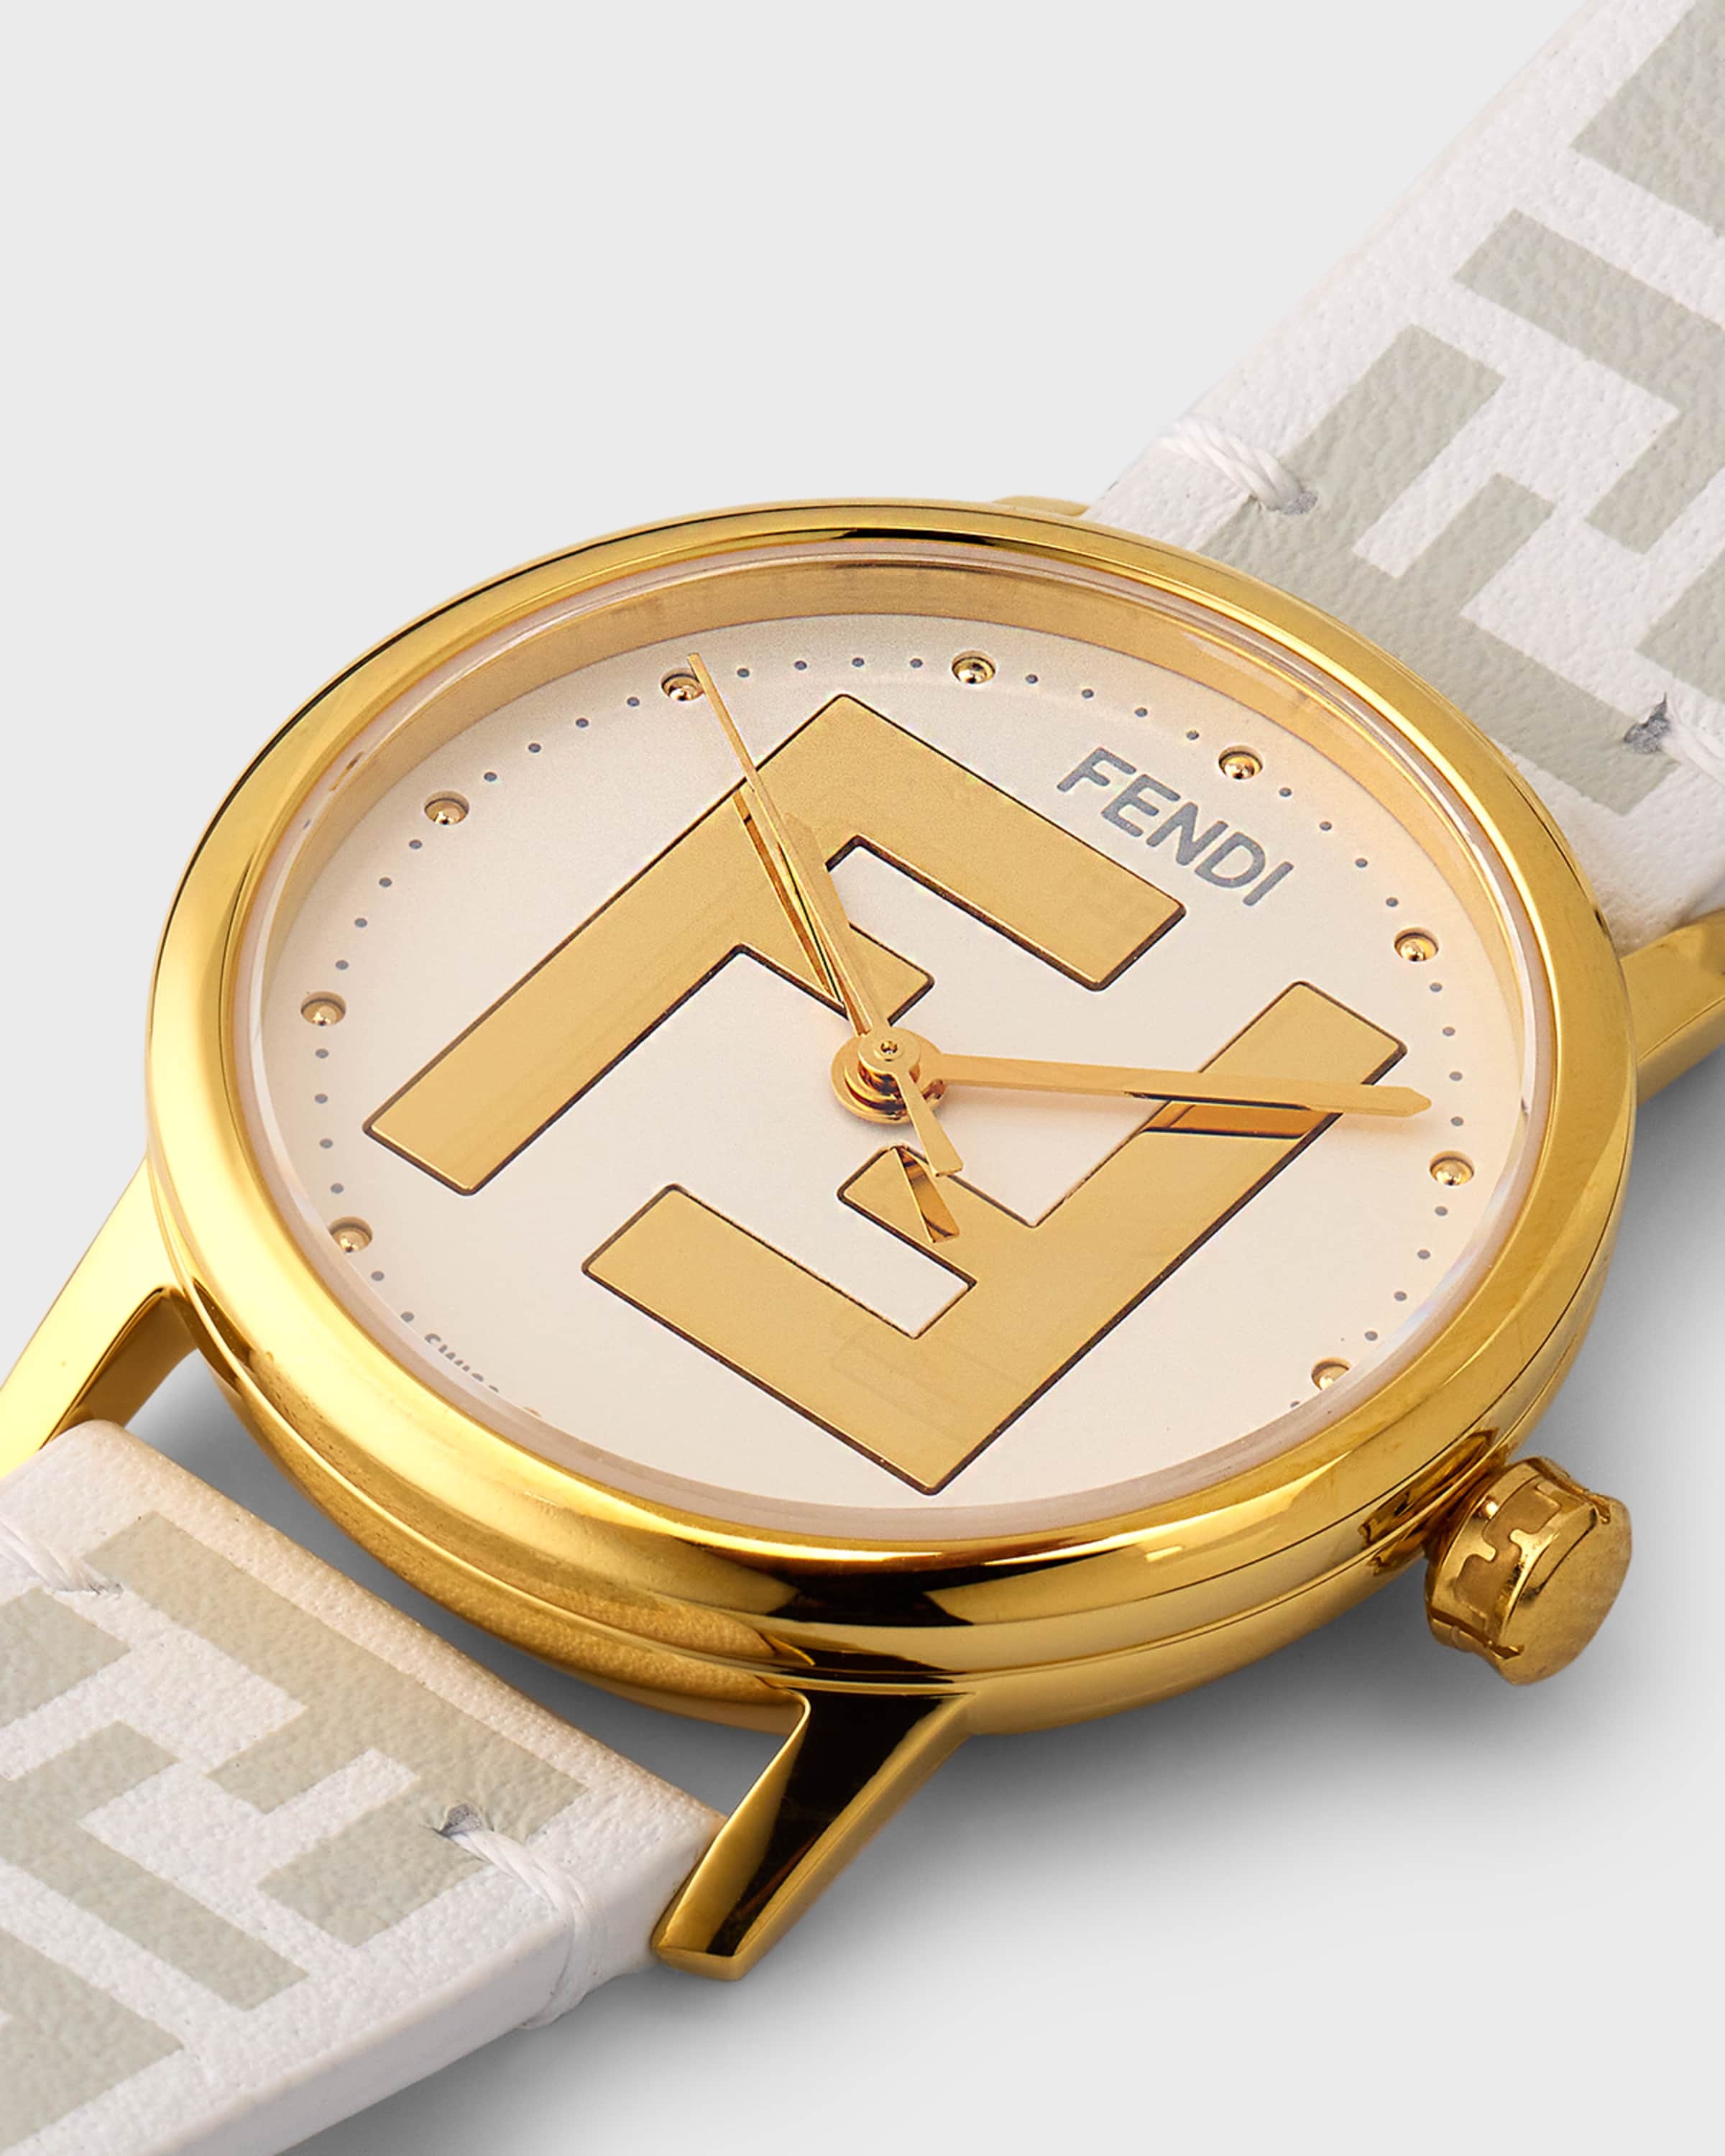 Forever Fendi 29mm Watch with Leather Strap - 3